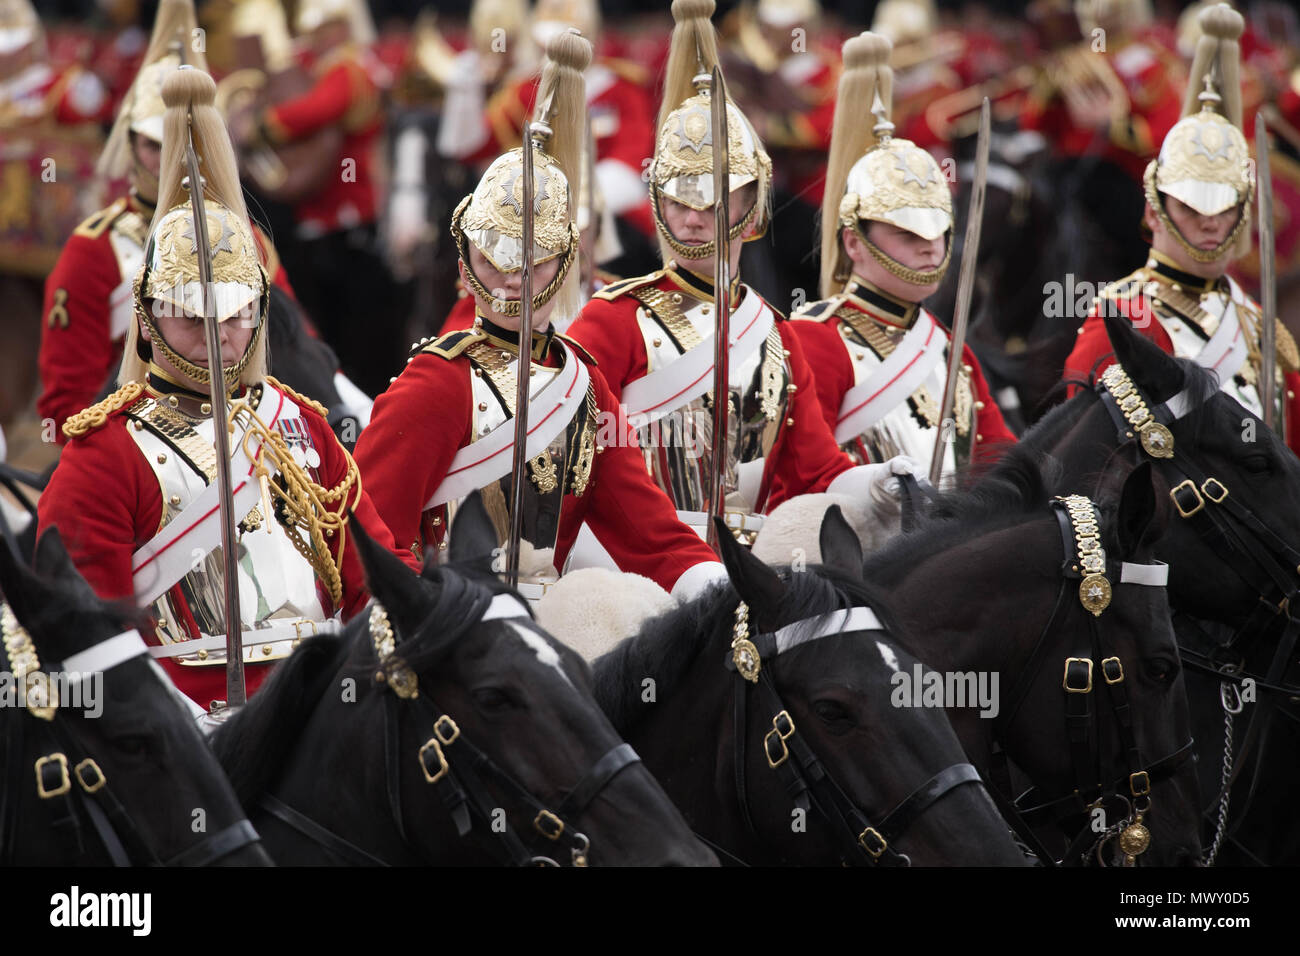 Soldiers on horseback during the Colonel's Review, which is the final rehearsal for Trooping the Colour, the Queen's annual birthday parade, in Central London. Stock Photo